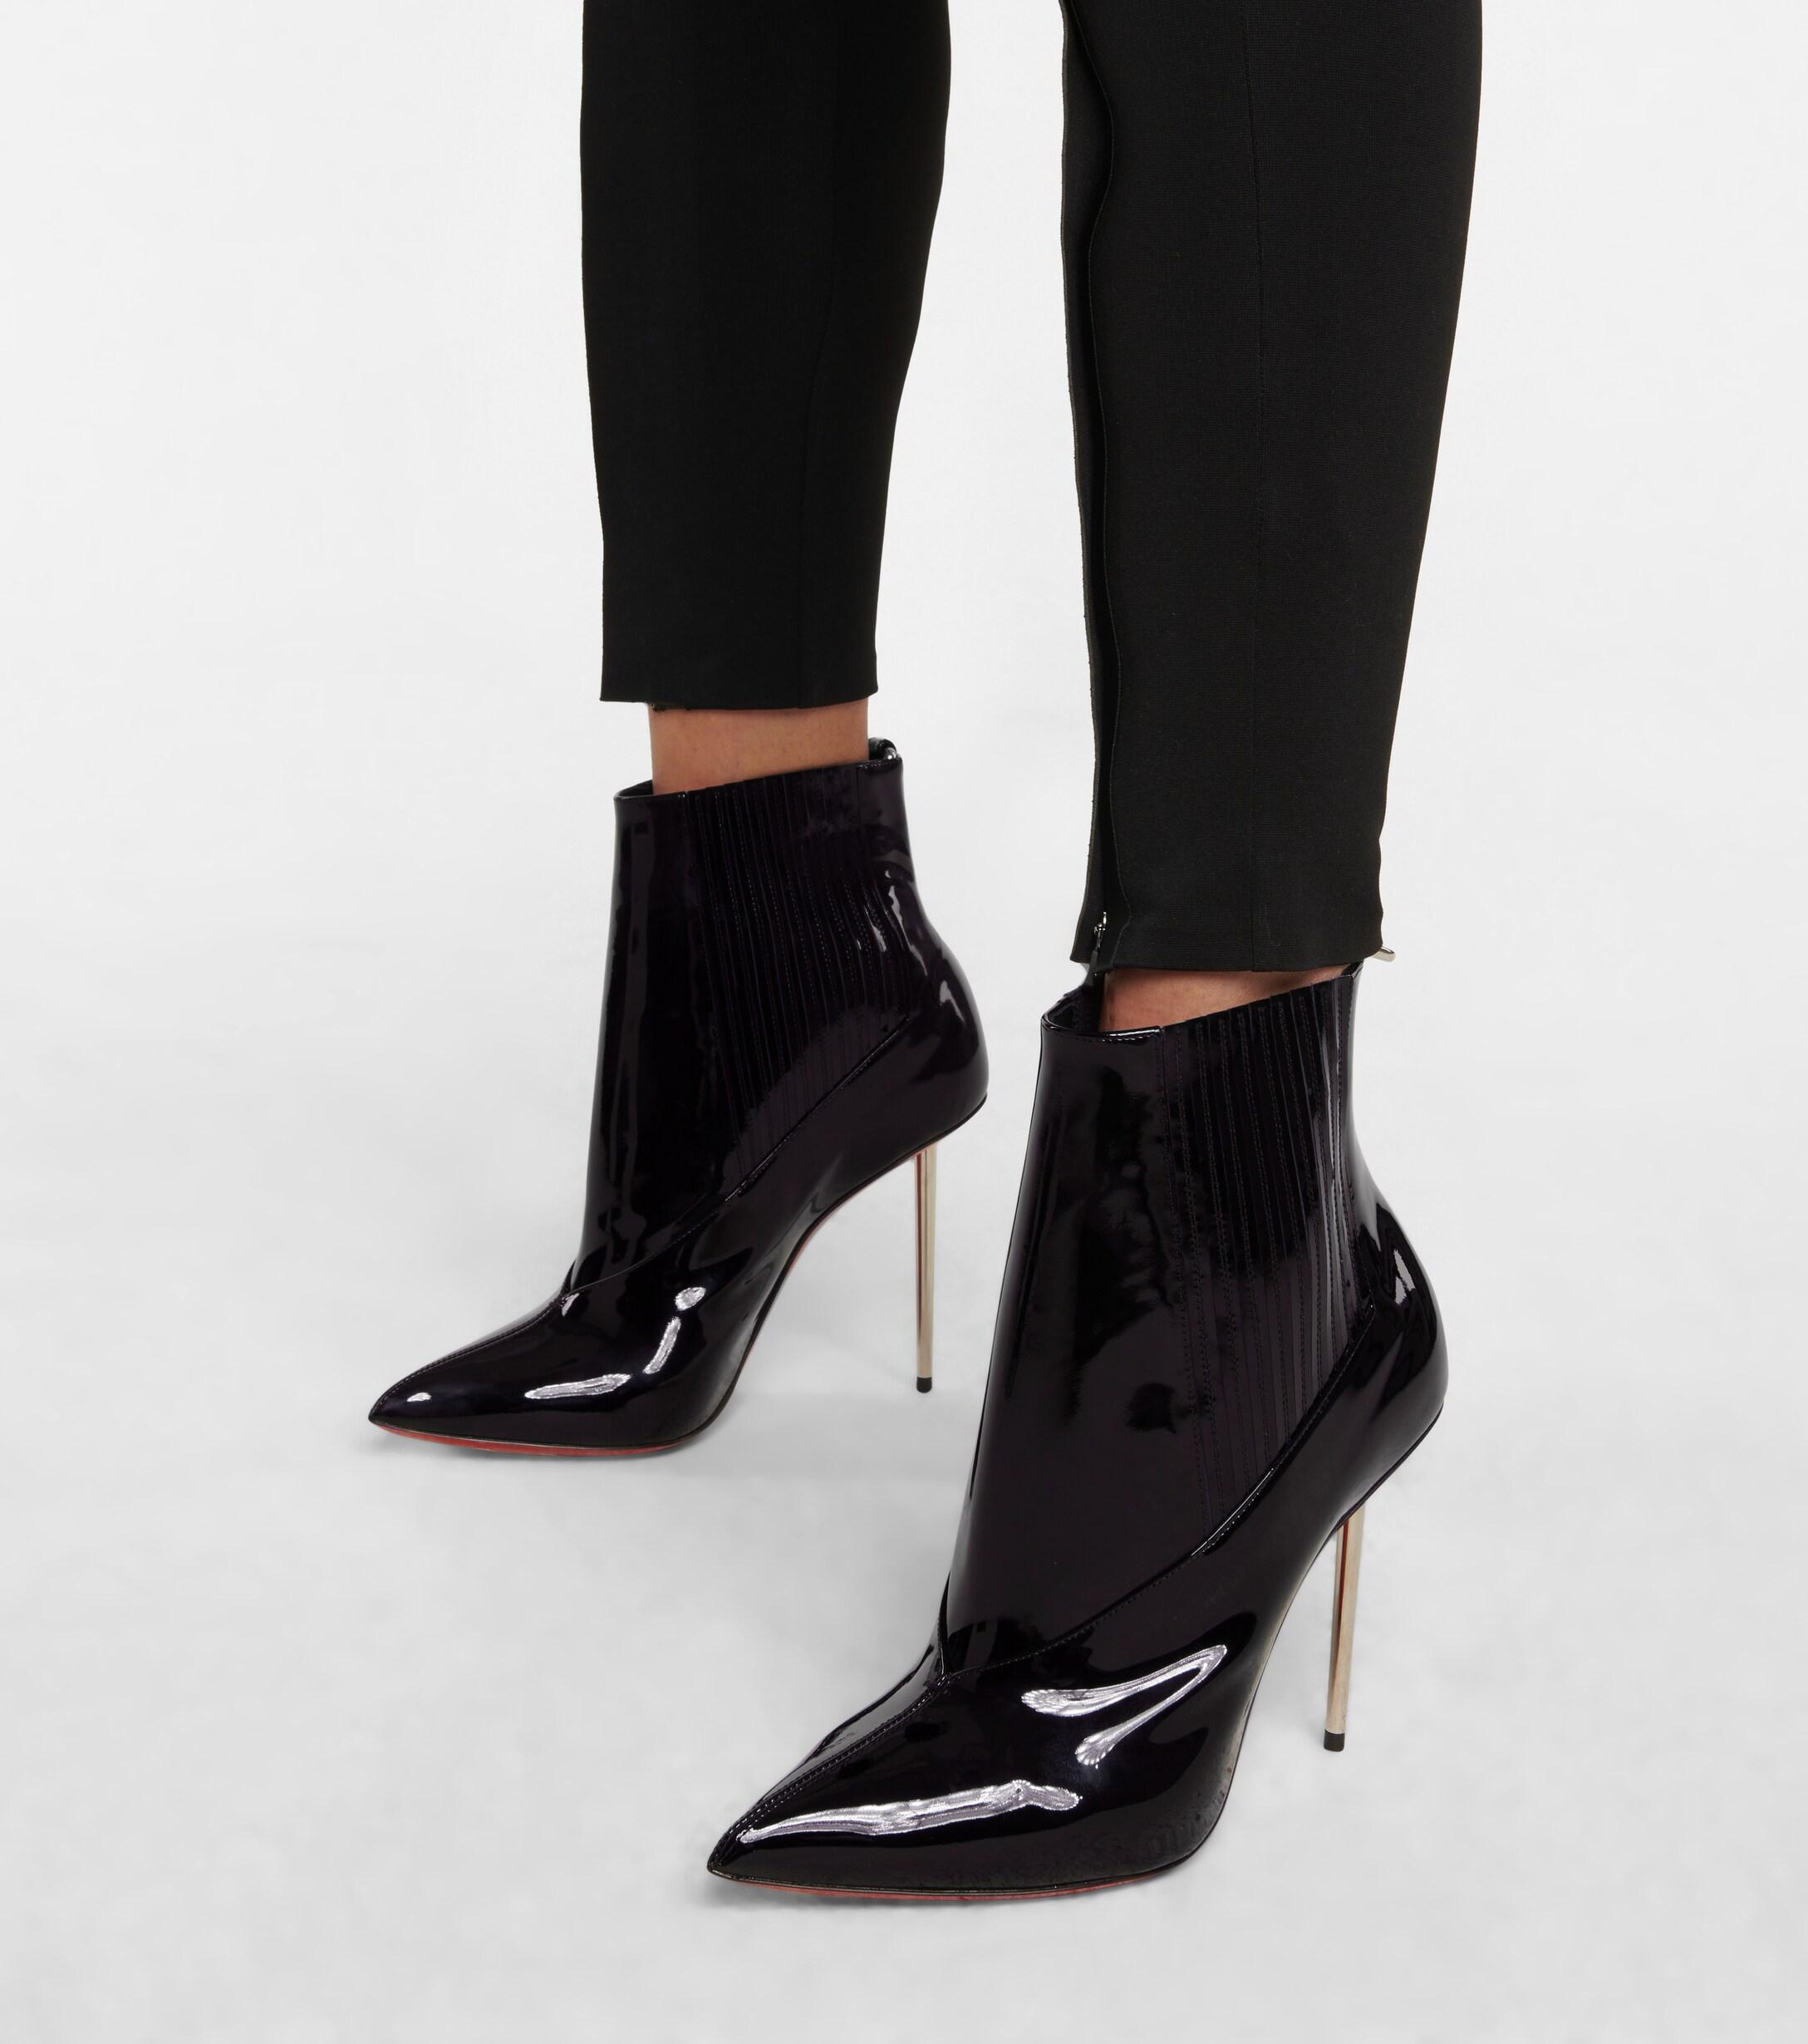 Christian Louboutin Epic 100 Patent Leather Ankle Boots in Black 